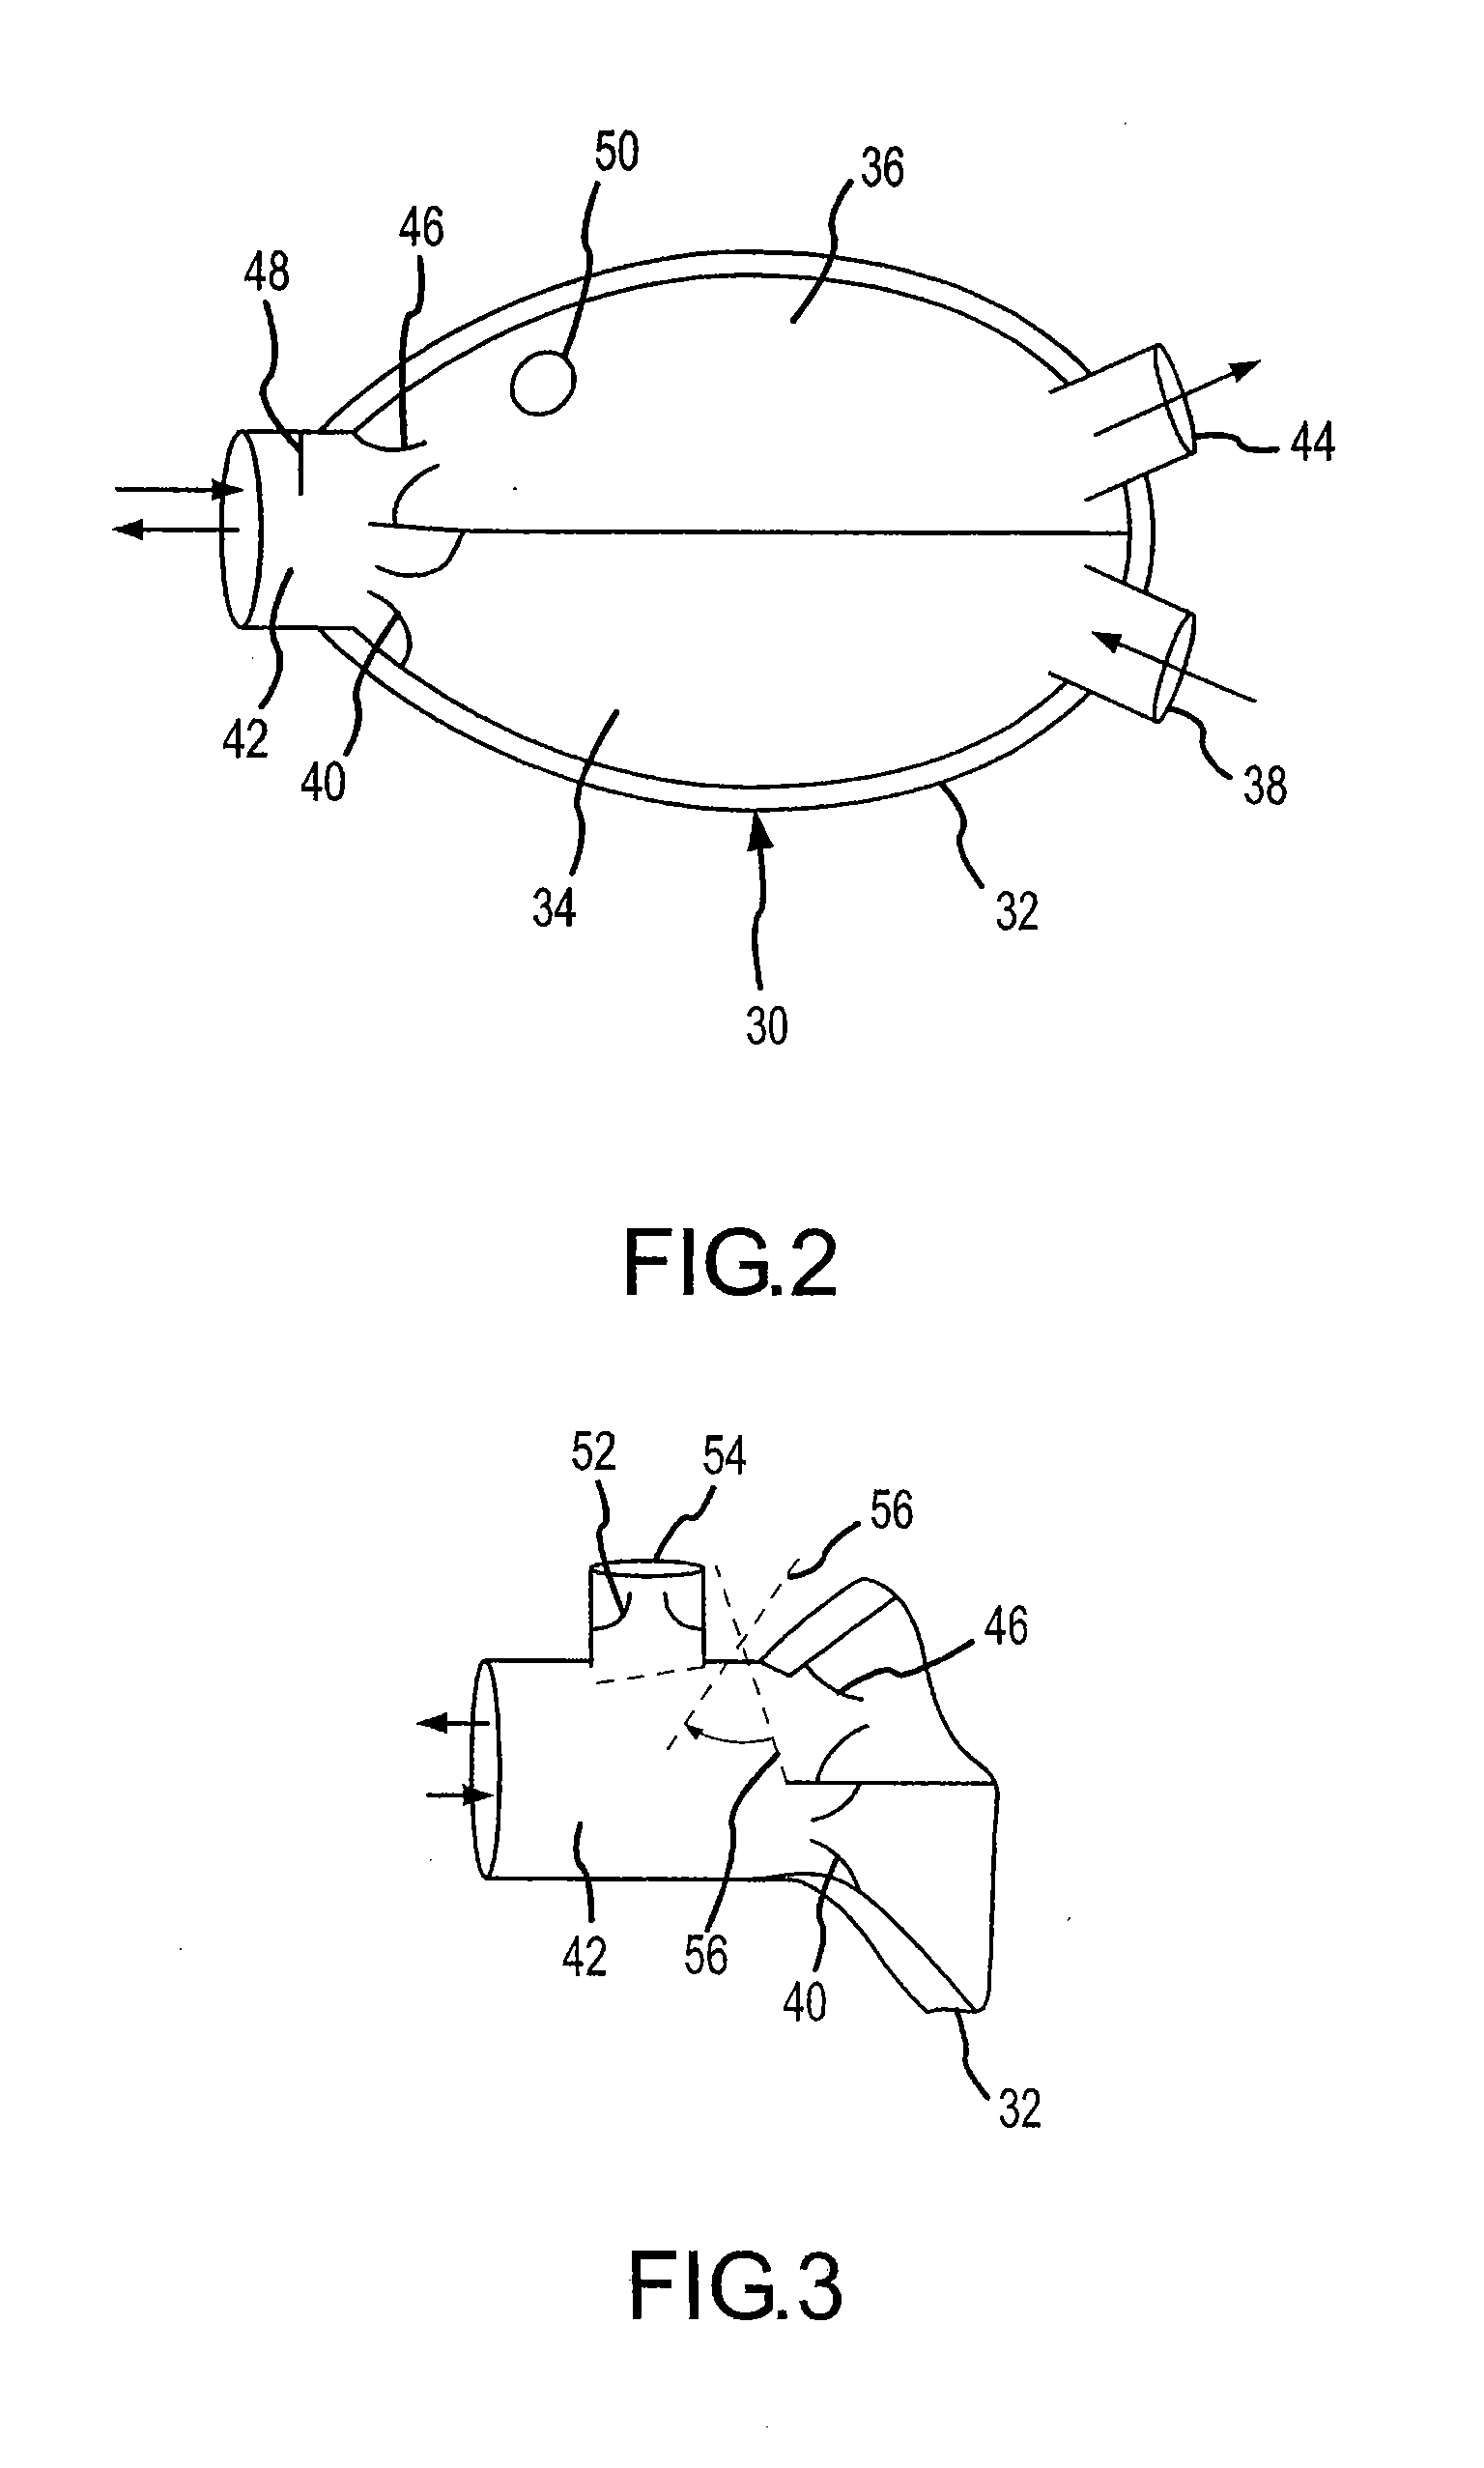 Cpr devices and methods utilizing a continuous supply of respiratory gases